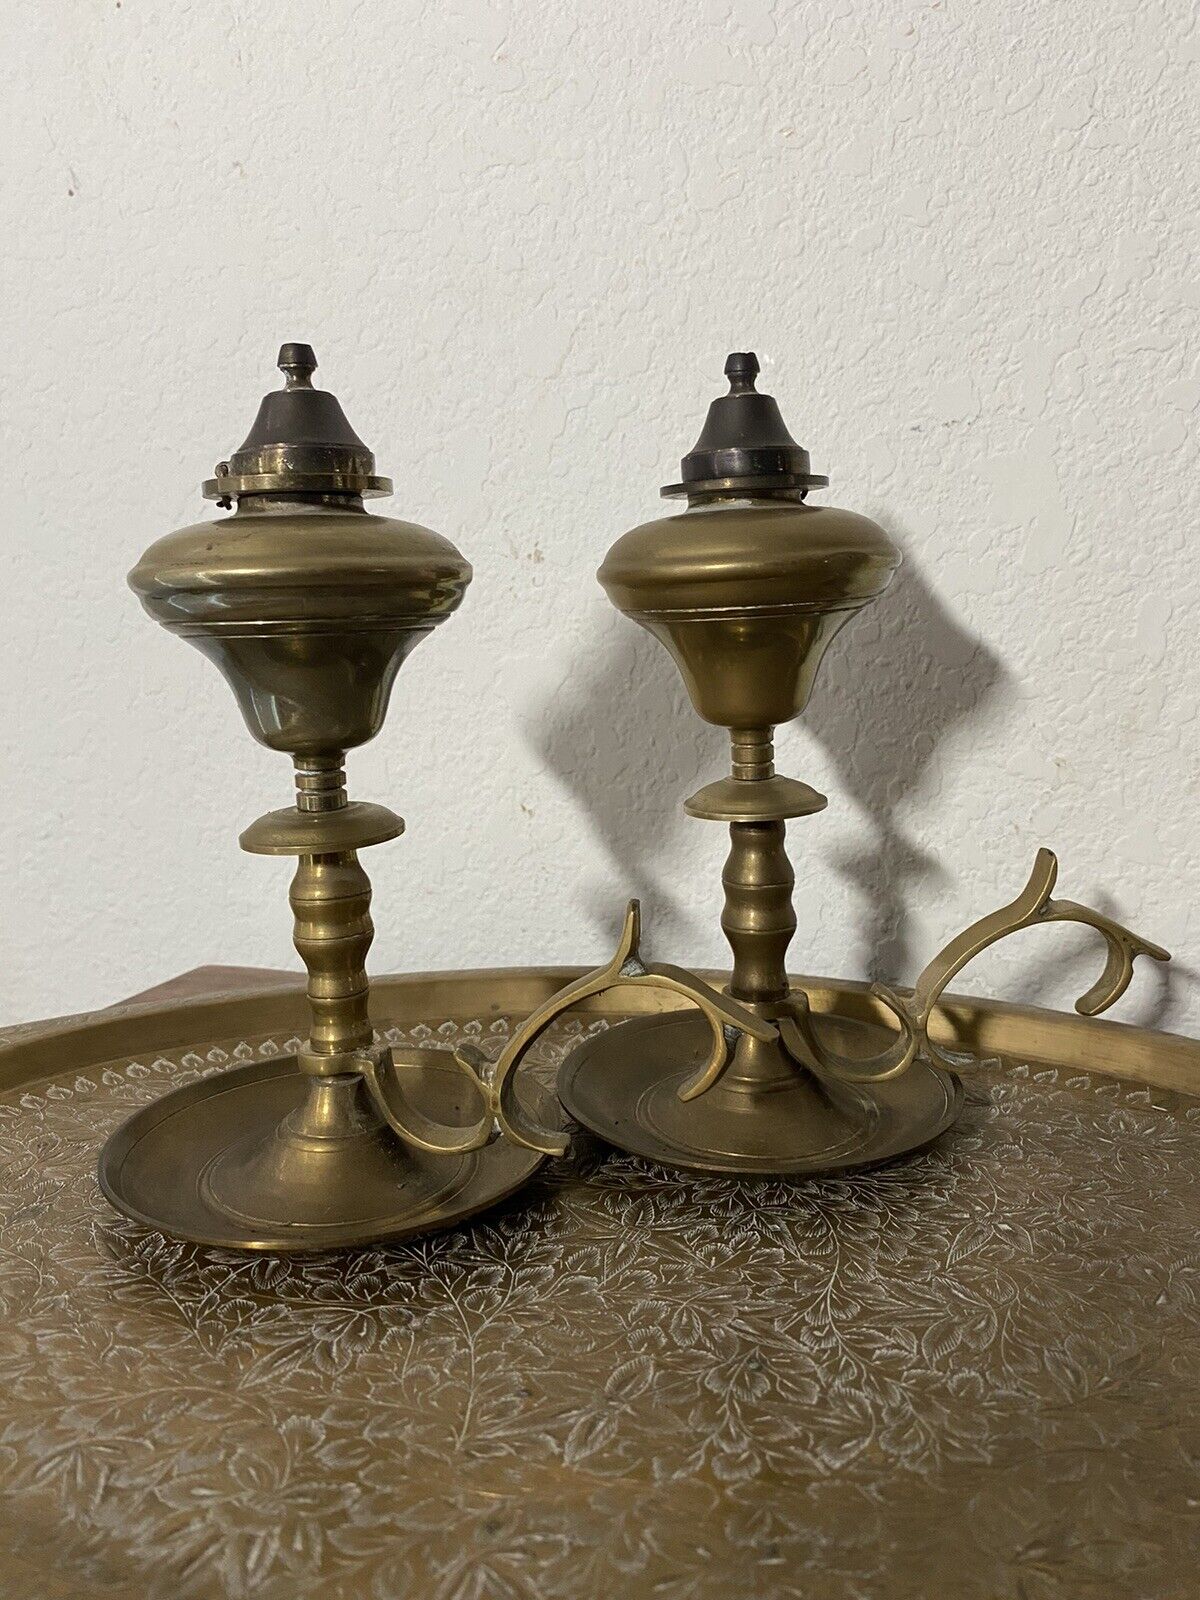 Pair Of Vintage Solid Brass Oil Lamps, With Snuffers And Ornate Handles